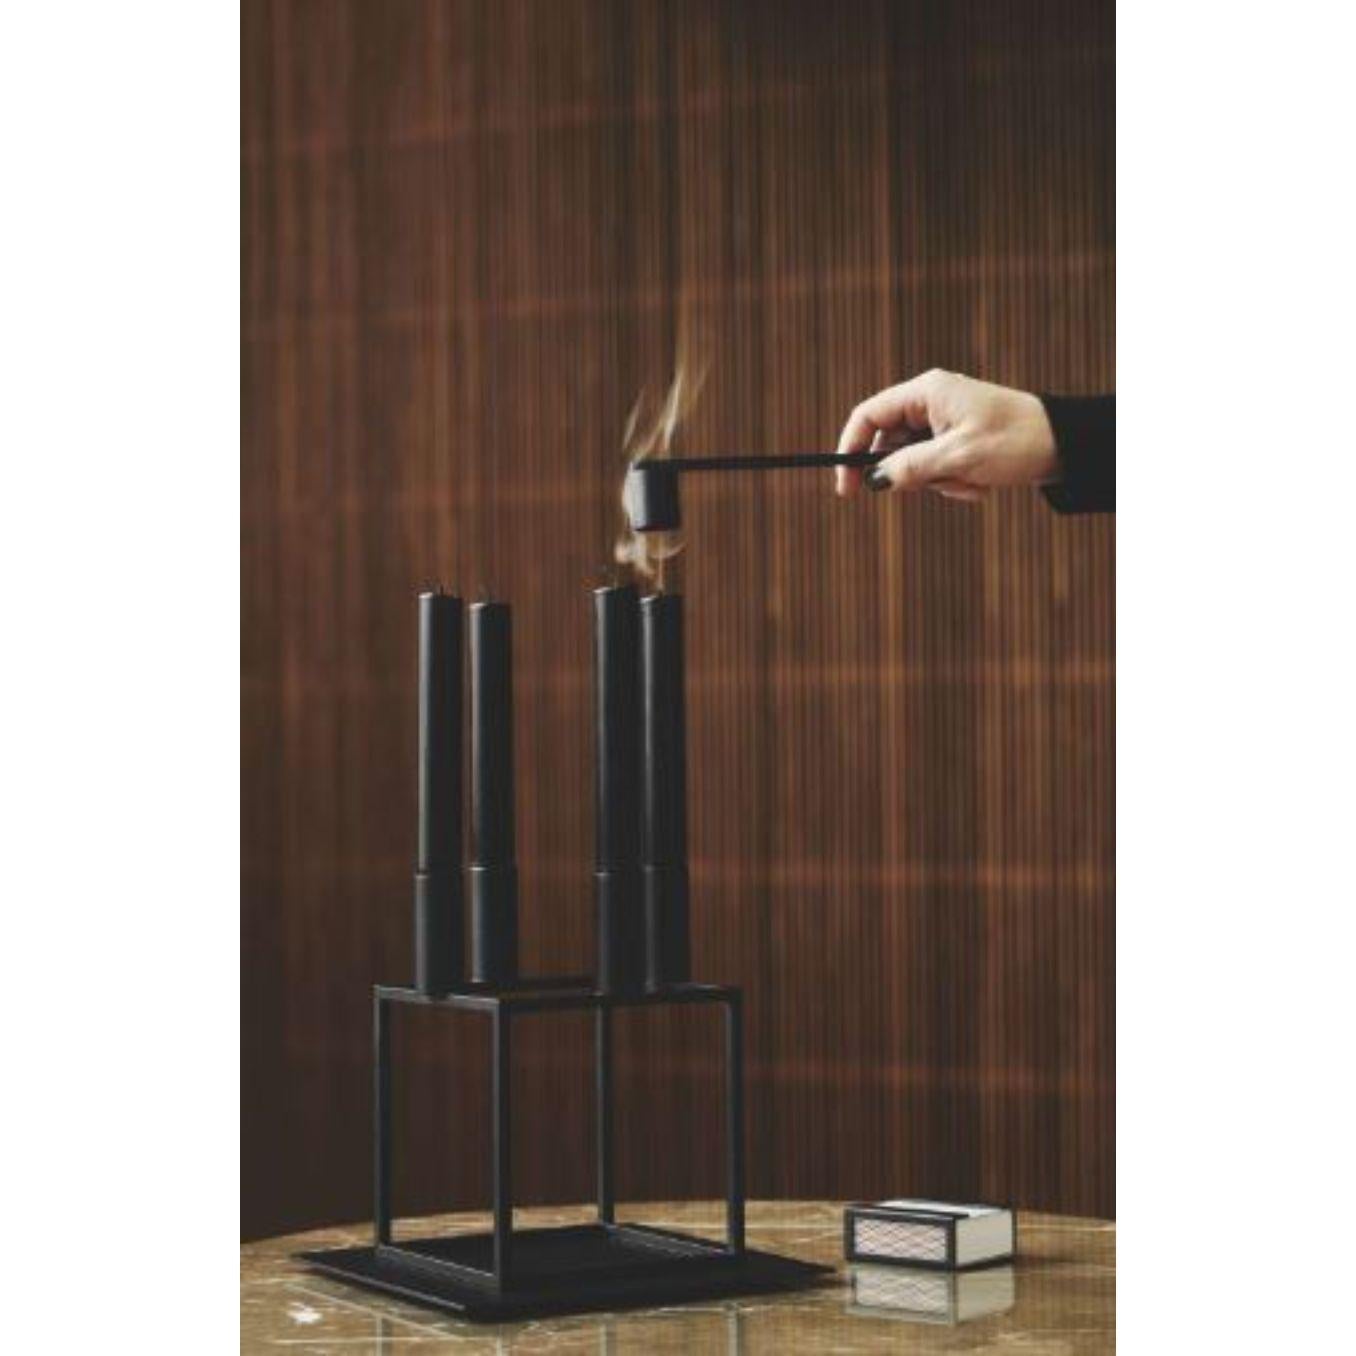 Other Black Kubus 4 Candle Holder by Lassen